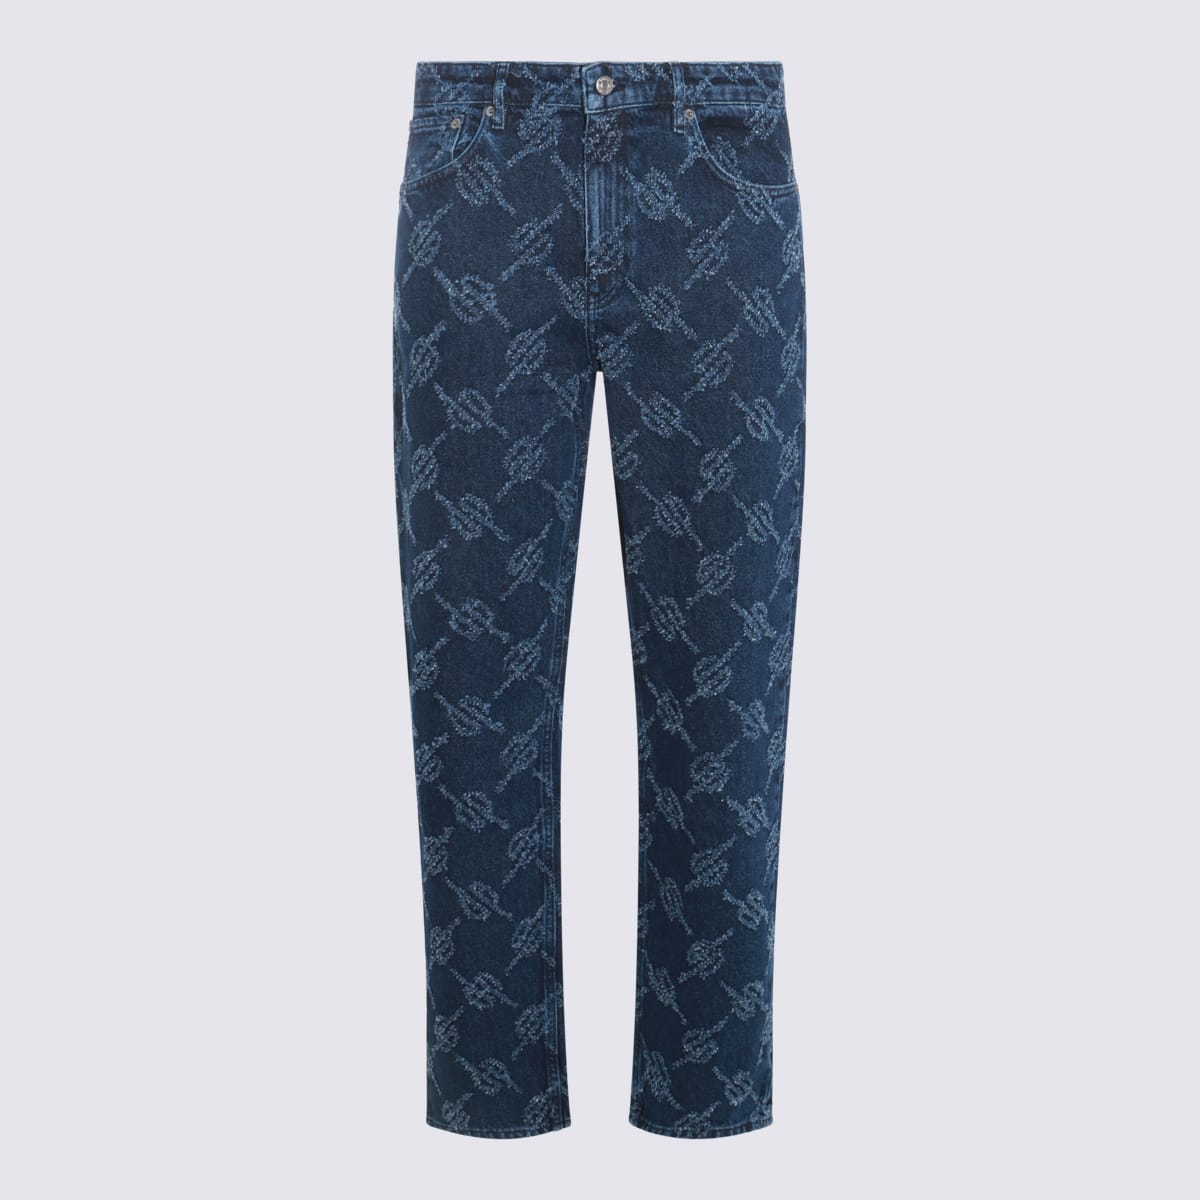 DAILY PAPER DARK BLUE COTTON JEANS